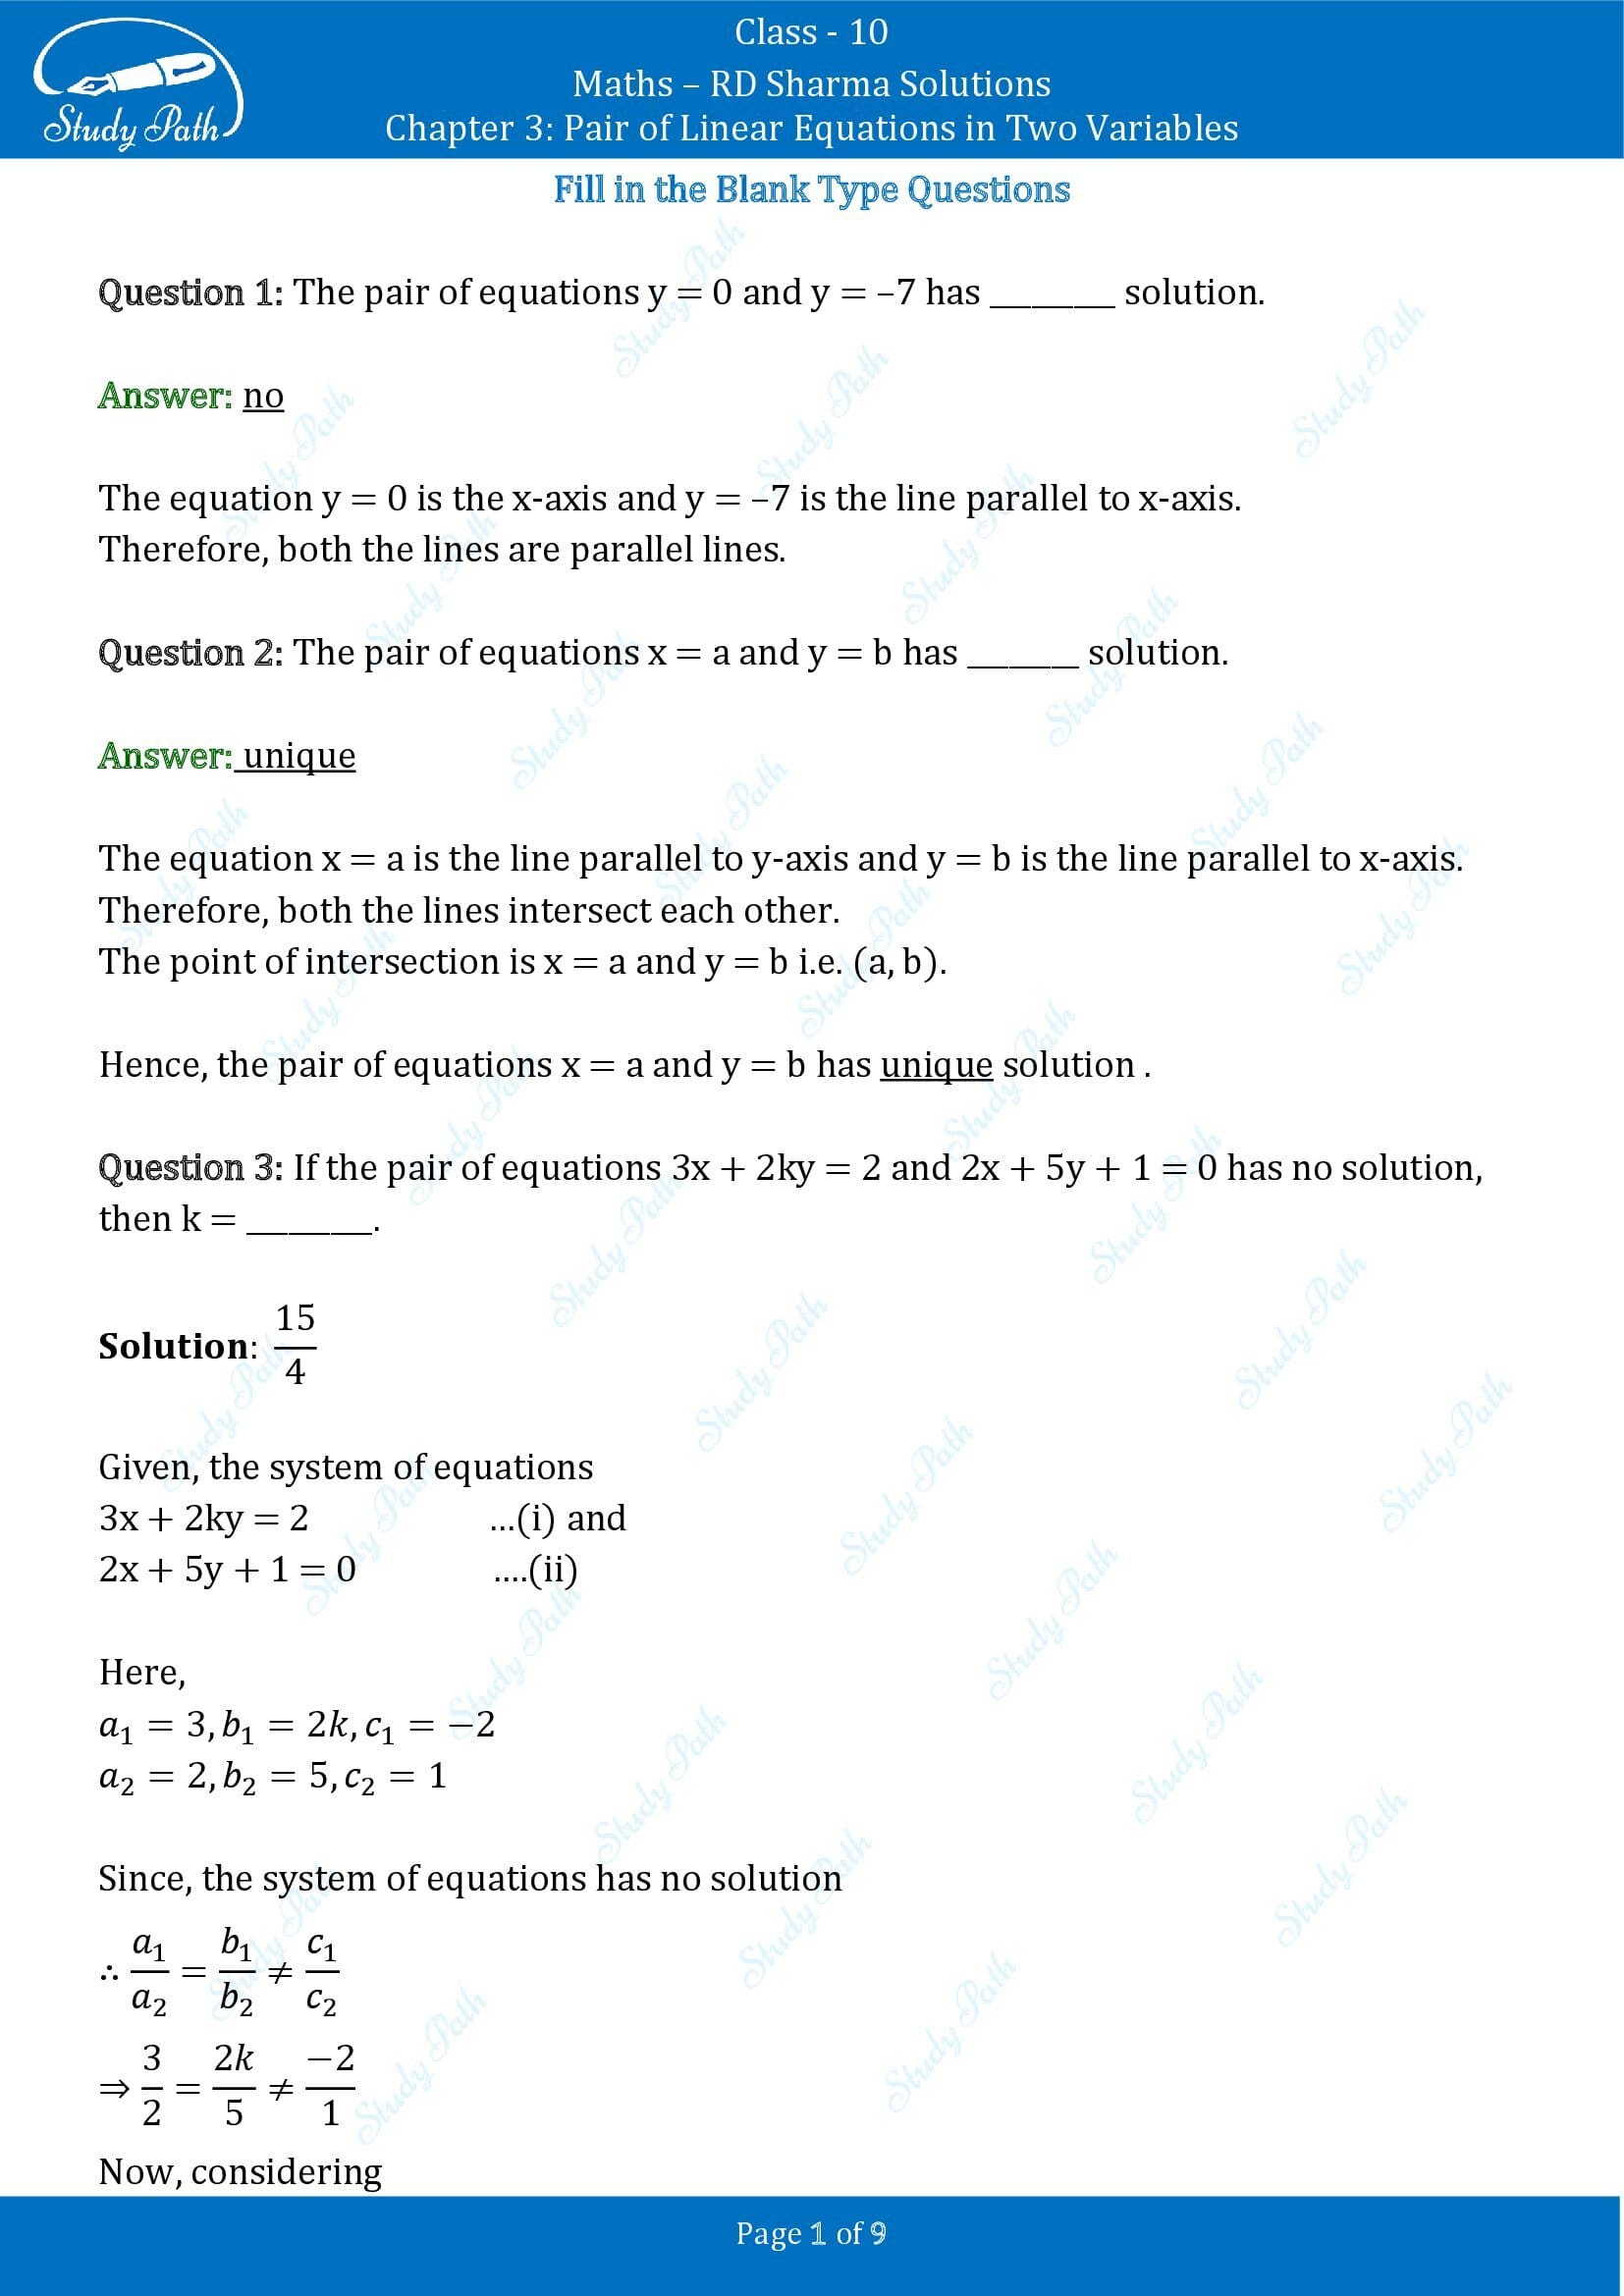 RD Sharma Solutions Class 10 Chapter 3 Pair of Linear Equations in Two Variables Exercise Fill in the Blank Type Questions FBQs 00001